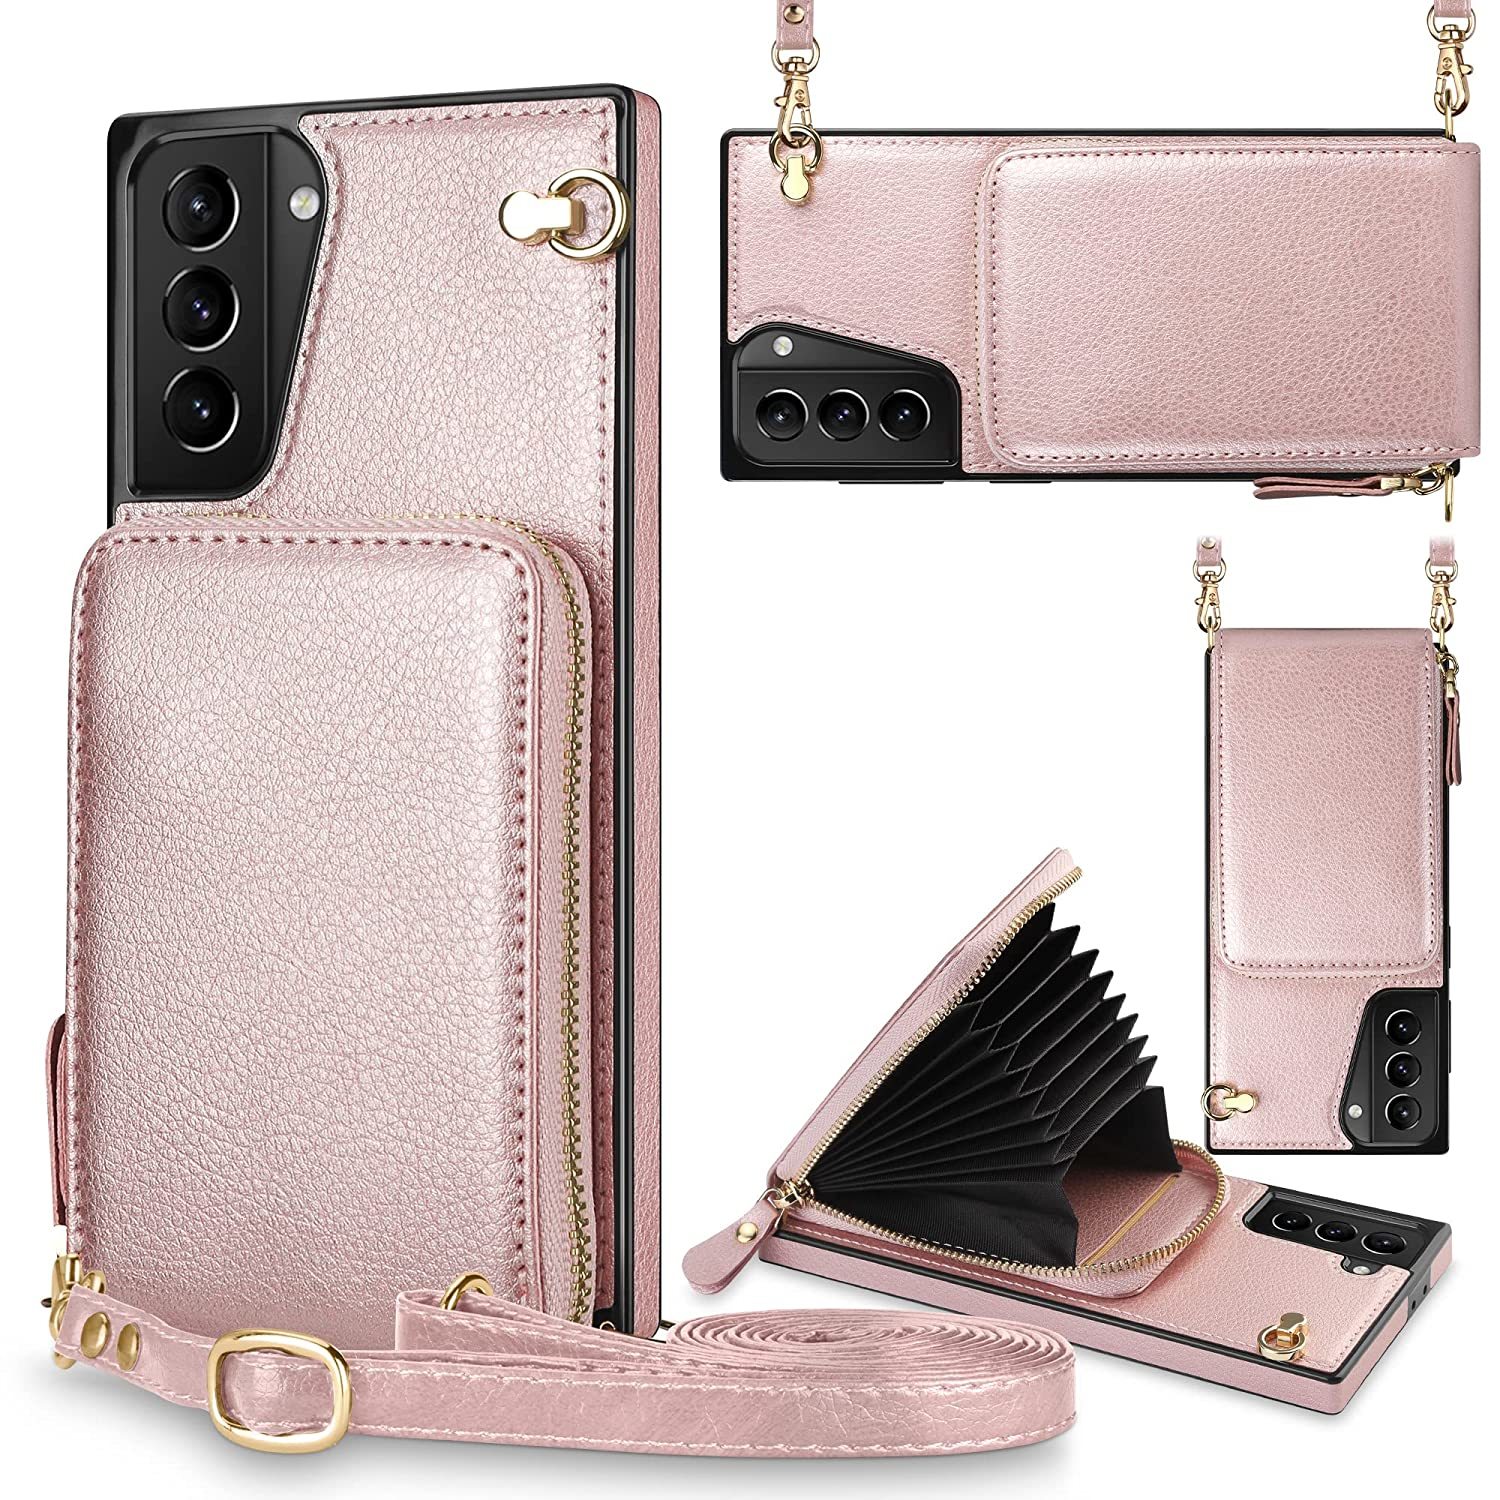 For Samsung Galaxy S21 Plus 5G Case Wallet Zipper Leather Case With Card Holder  - $37.99